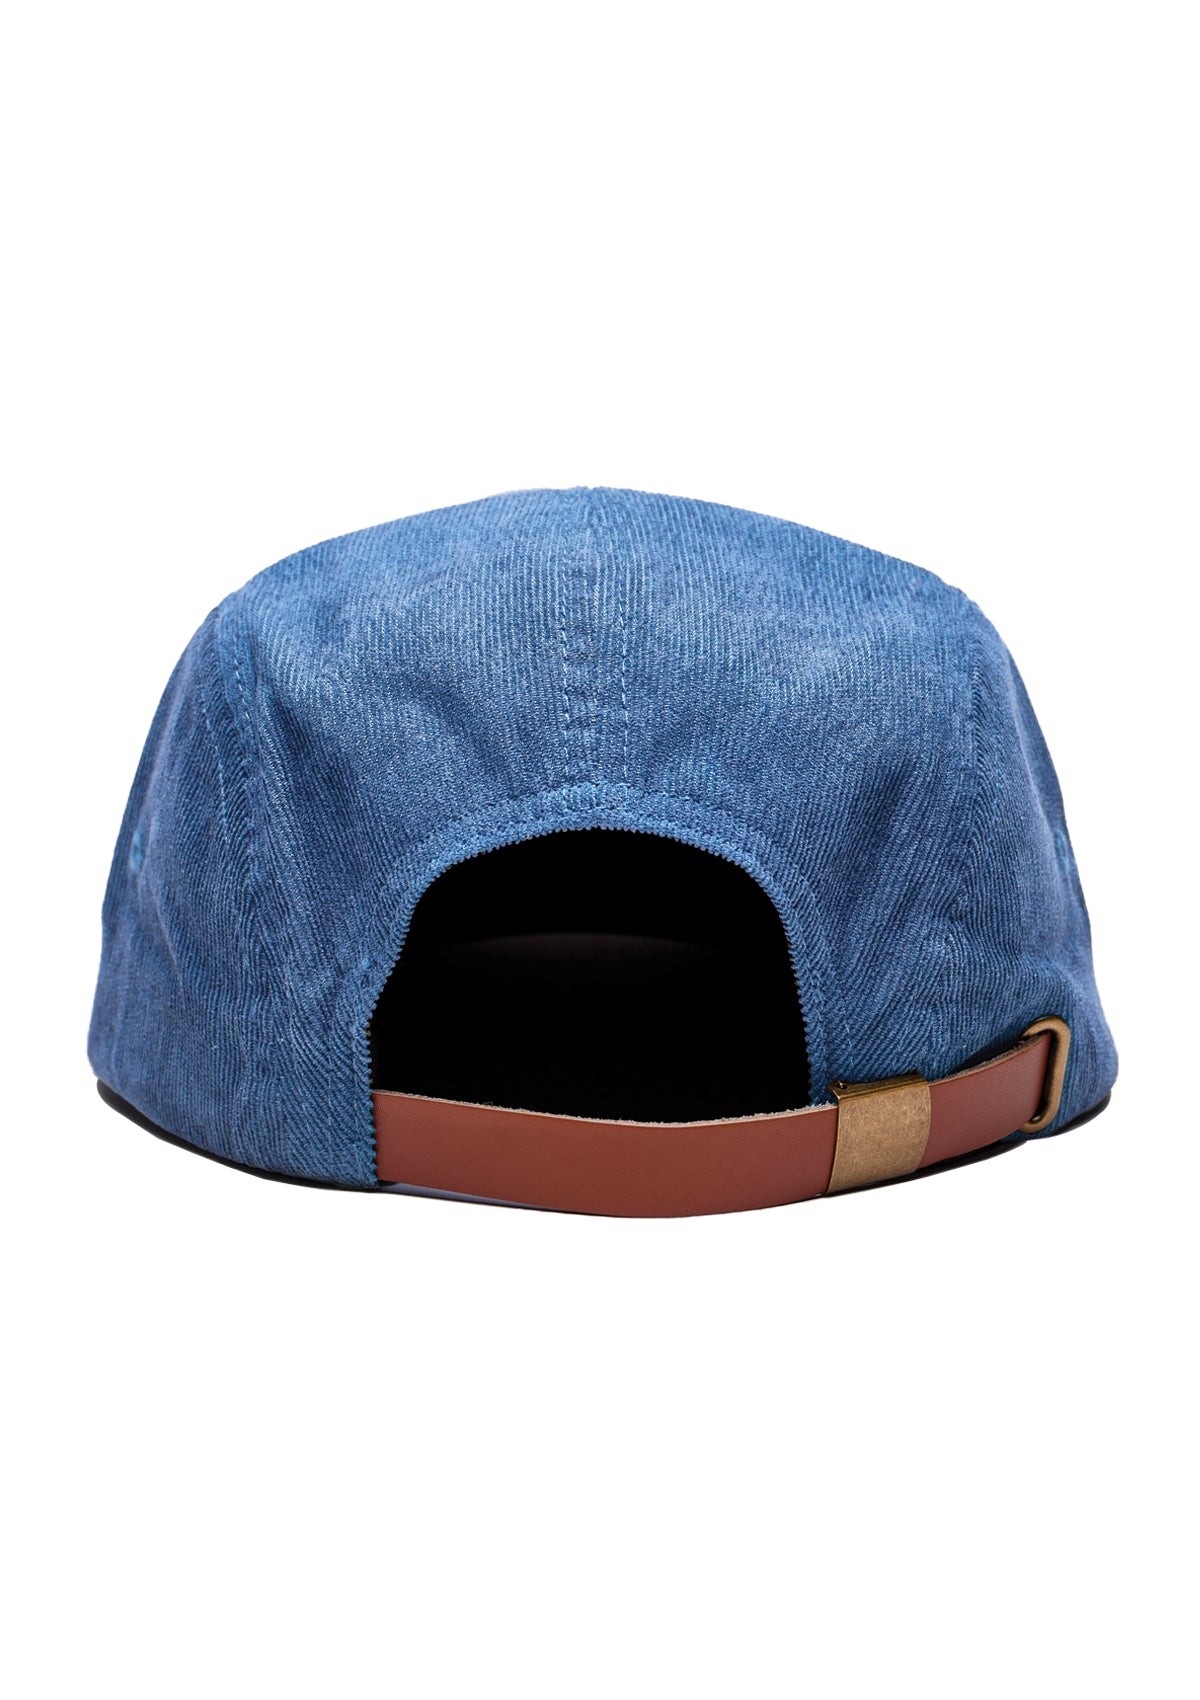 Washed Cord Cap - Ocean